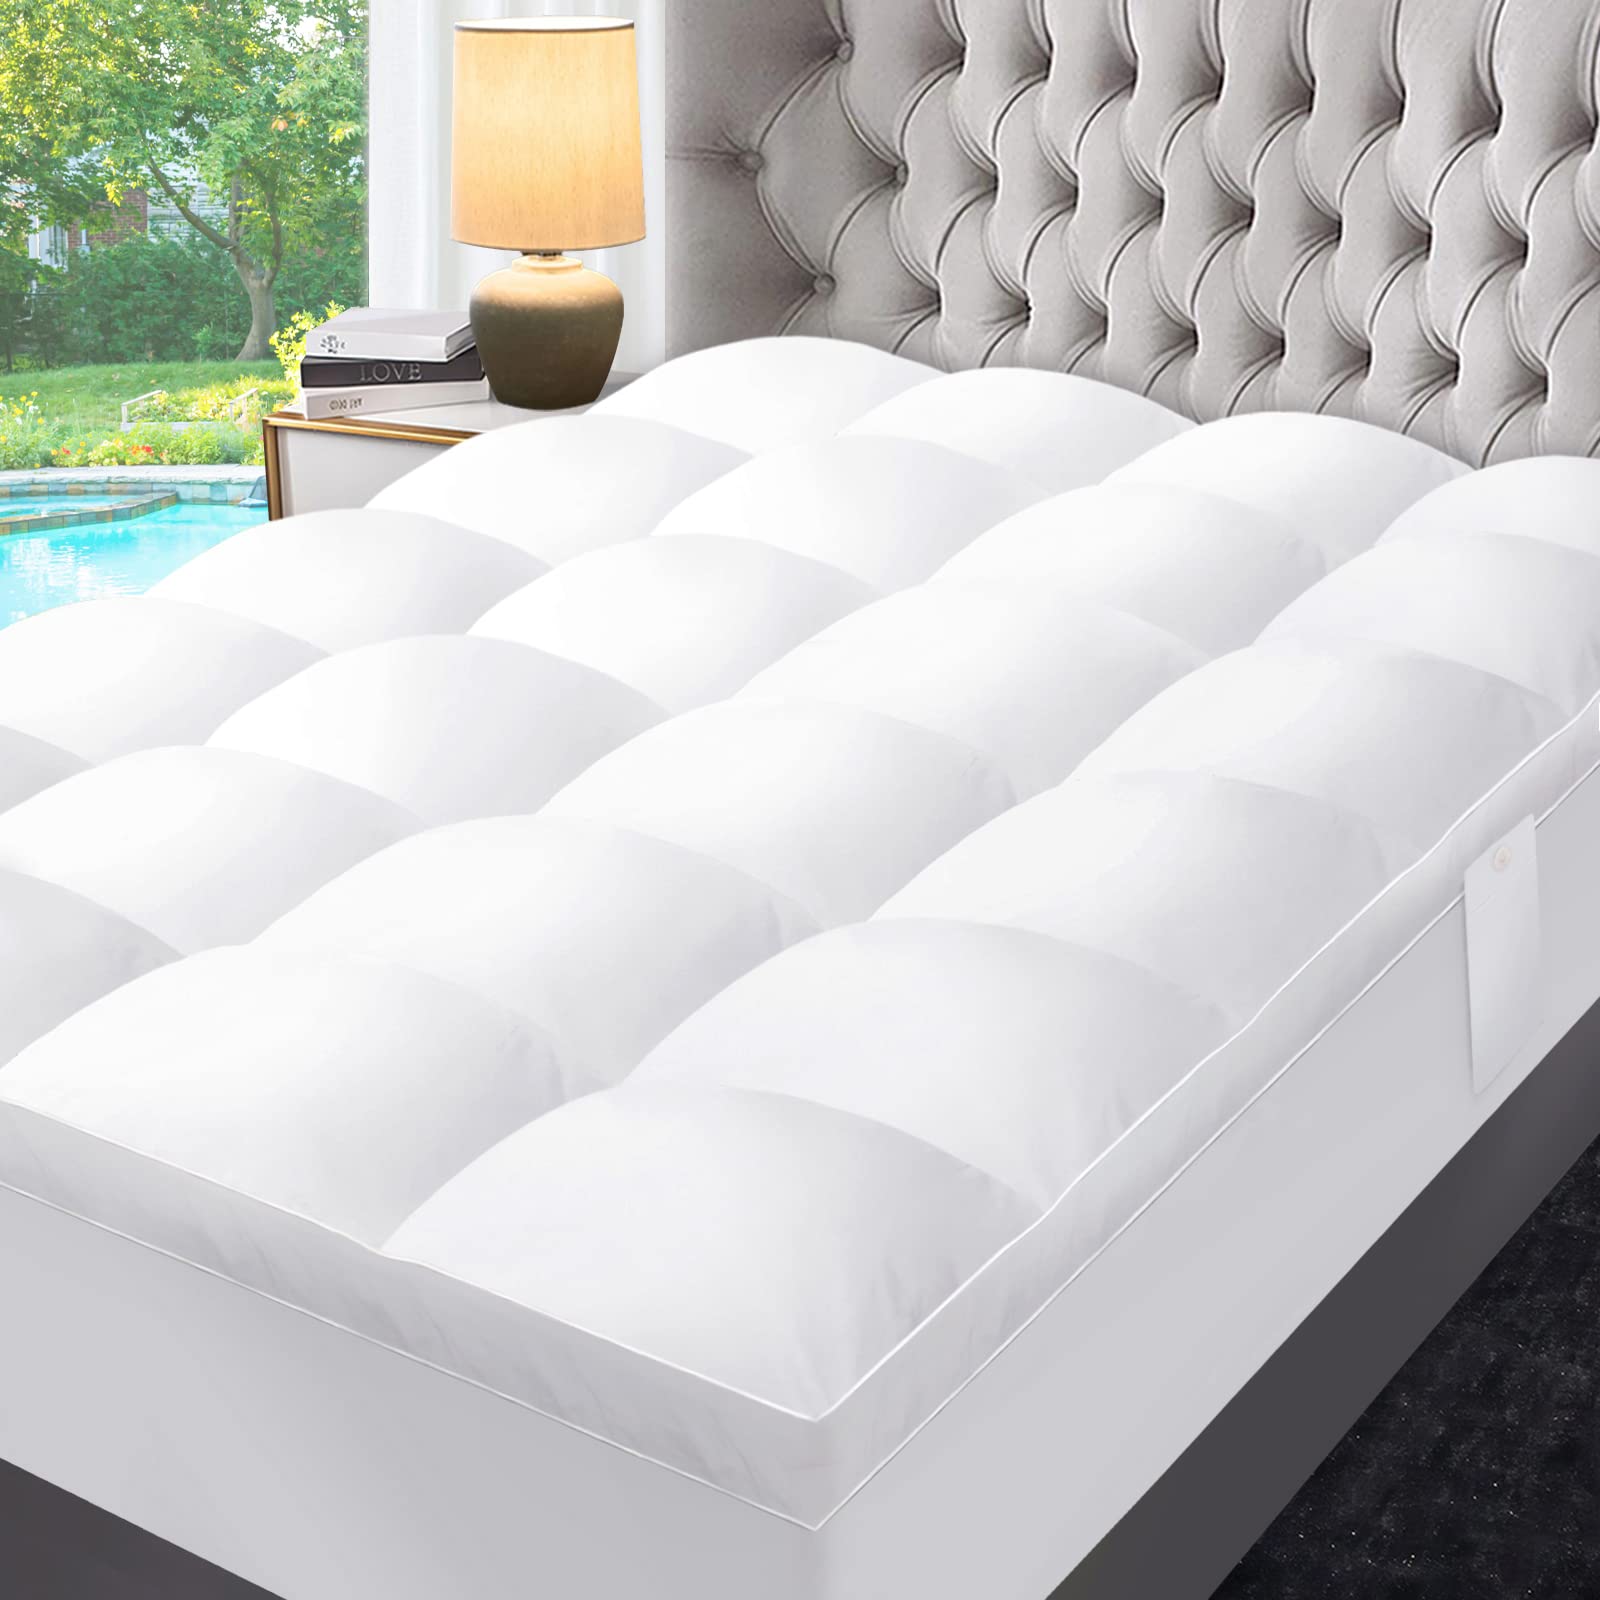 ABENE Queen Size Extra Thick Fusion Down Feather Filled Bed Mattress Topper for Back Pain, Plush Fluffy Doule Layer Pillowtop Lu